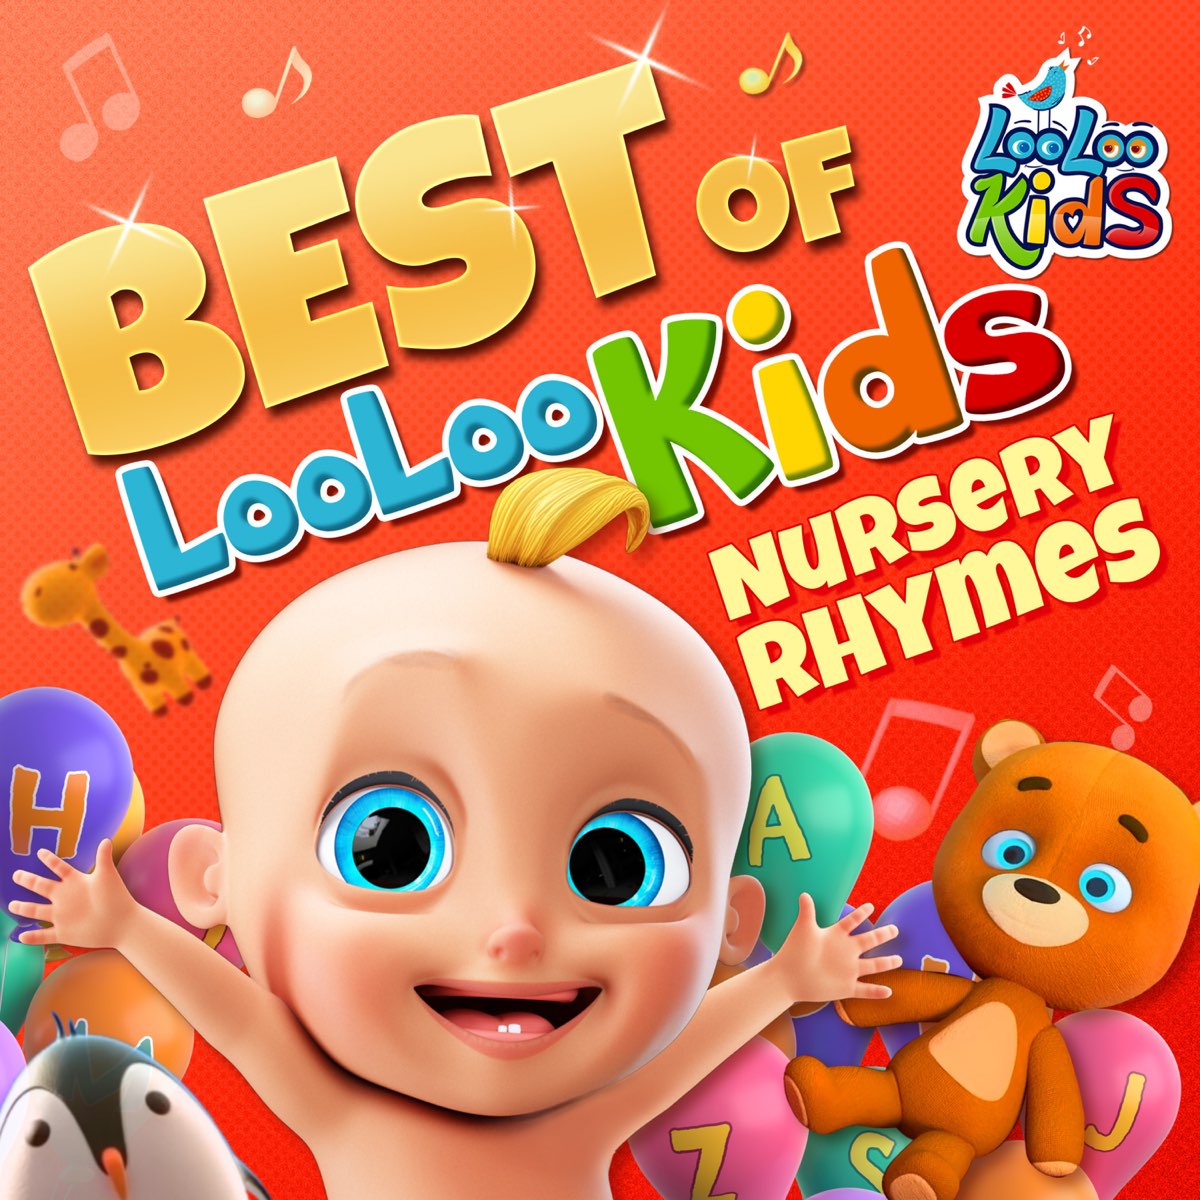 Lets child. LOOLOO. LOOLOO Kids Songs. Let's Play together.